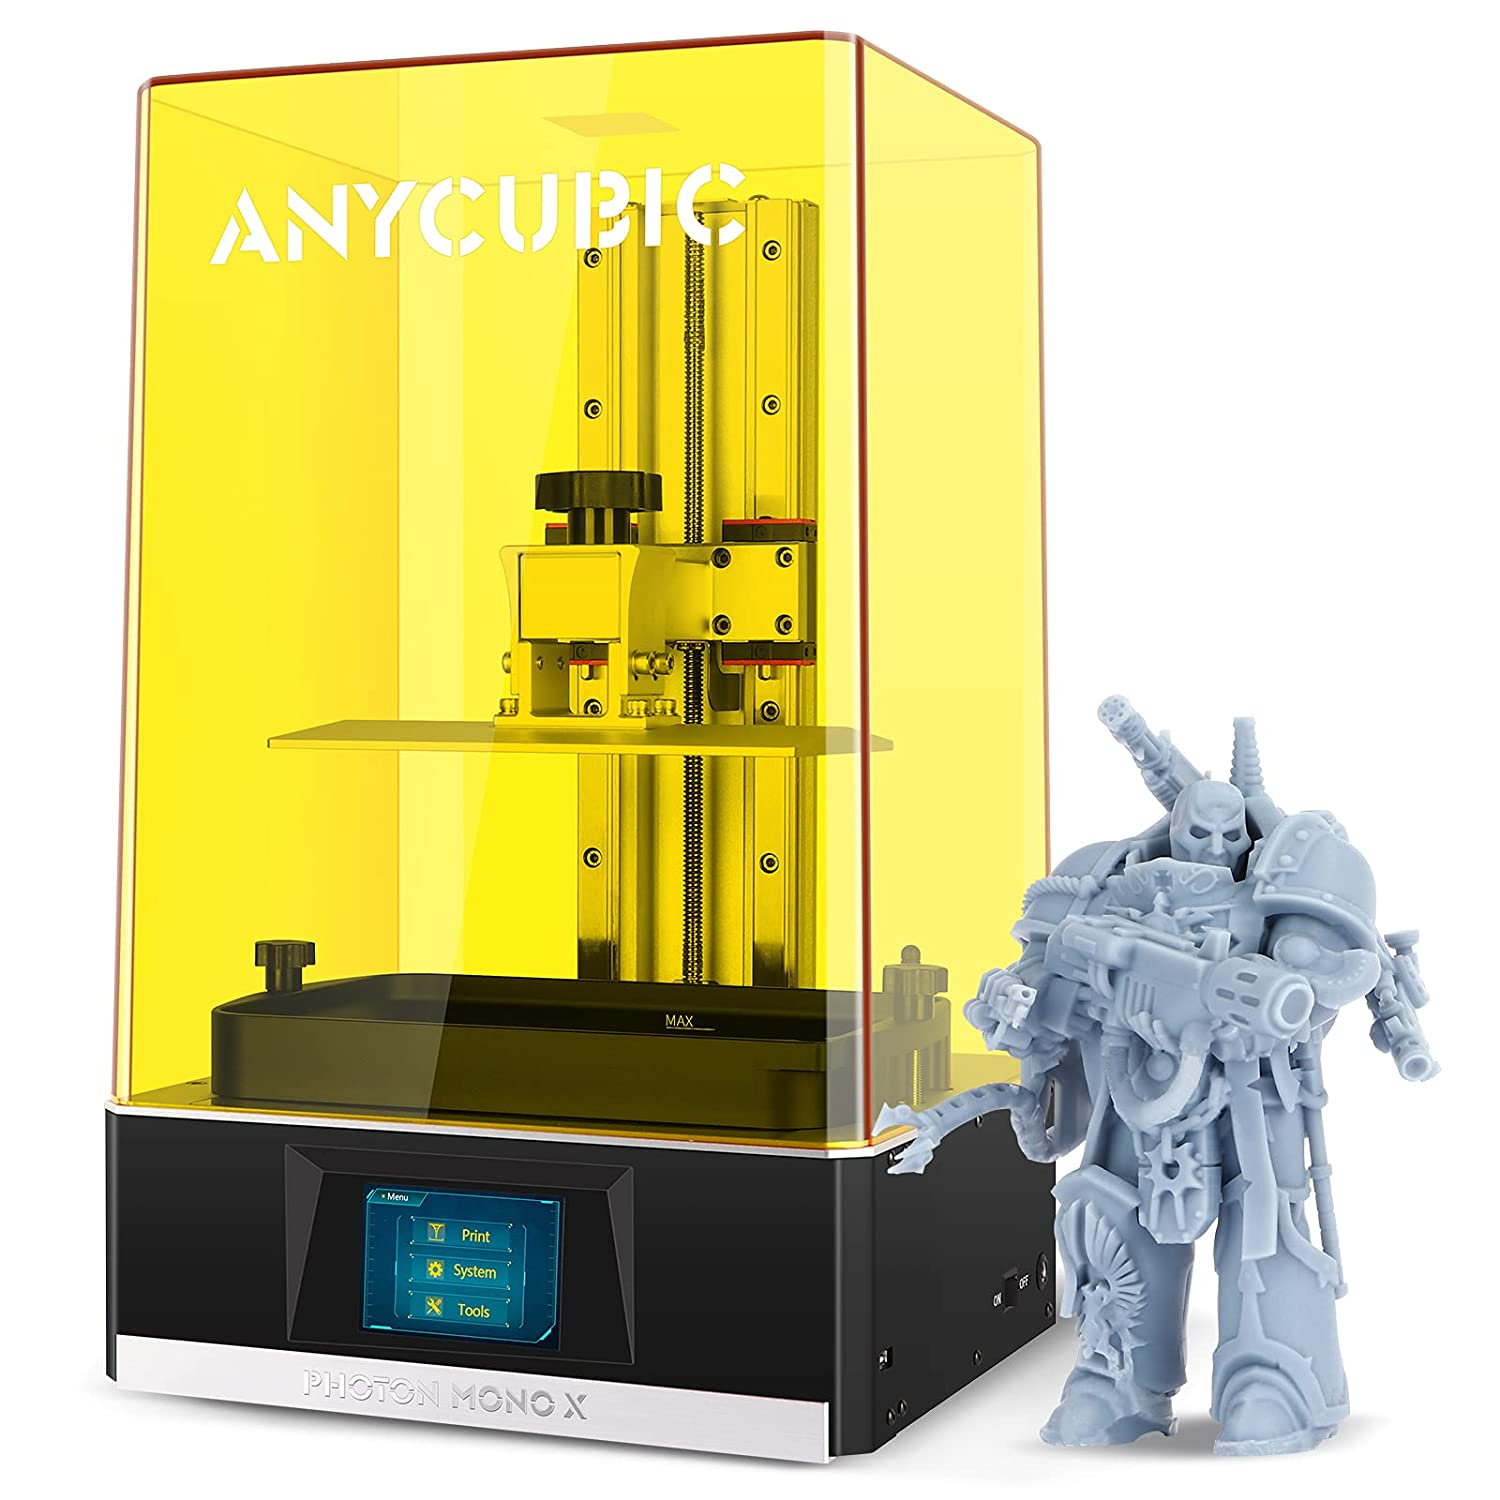 ANYCUBIC Resin 3D Printer, Photon Mono X Large LCD UV Photocuring Fast Printing $429